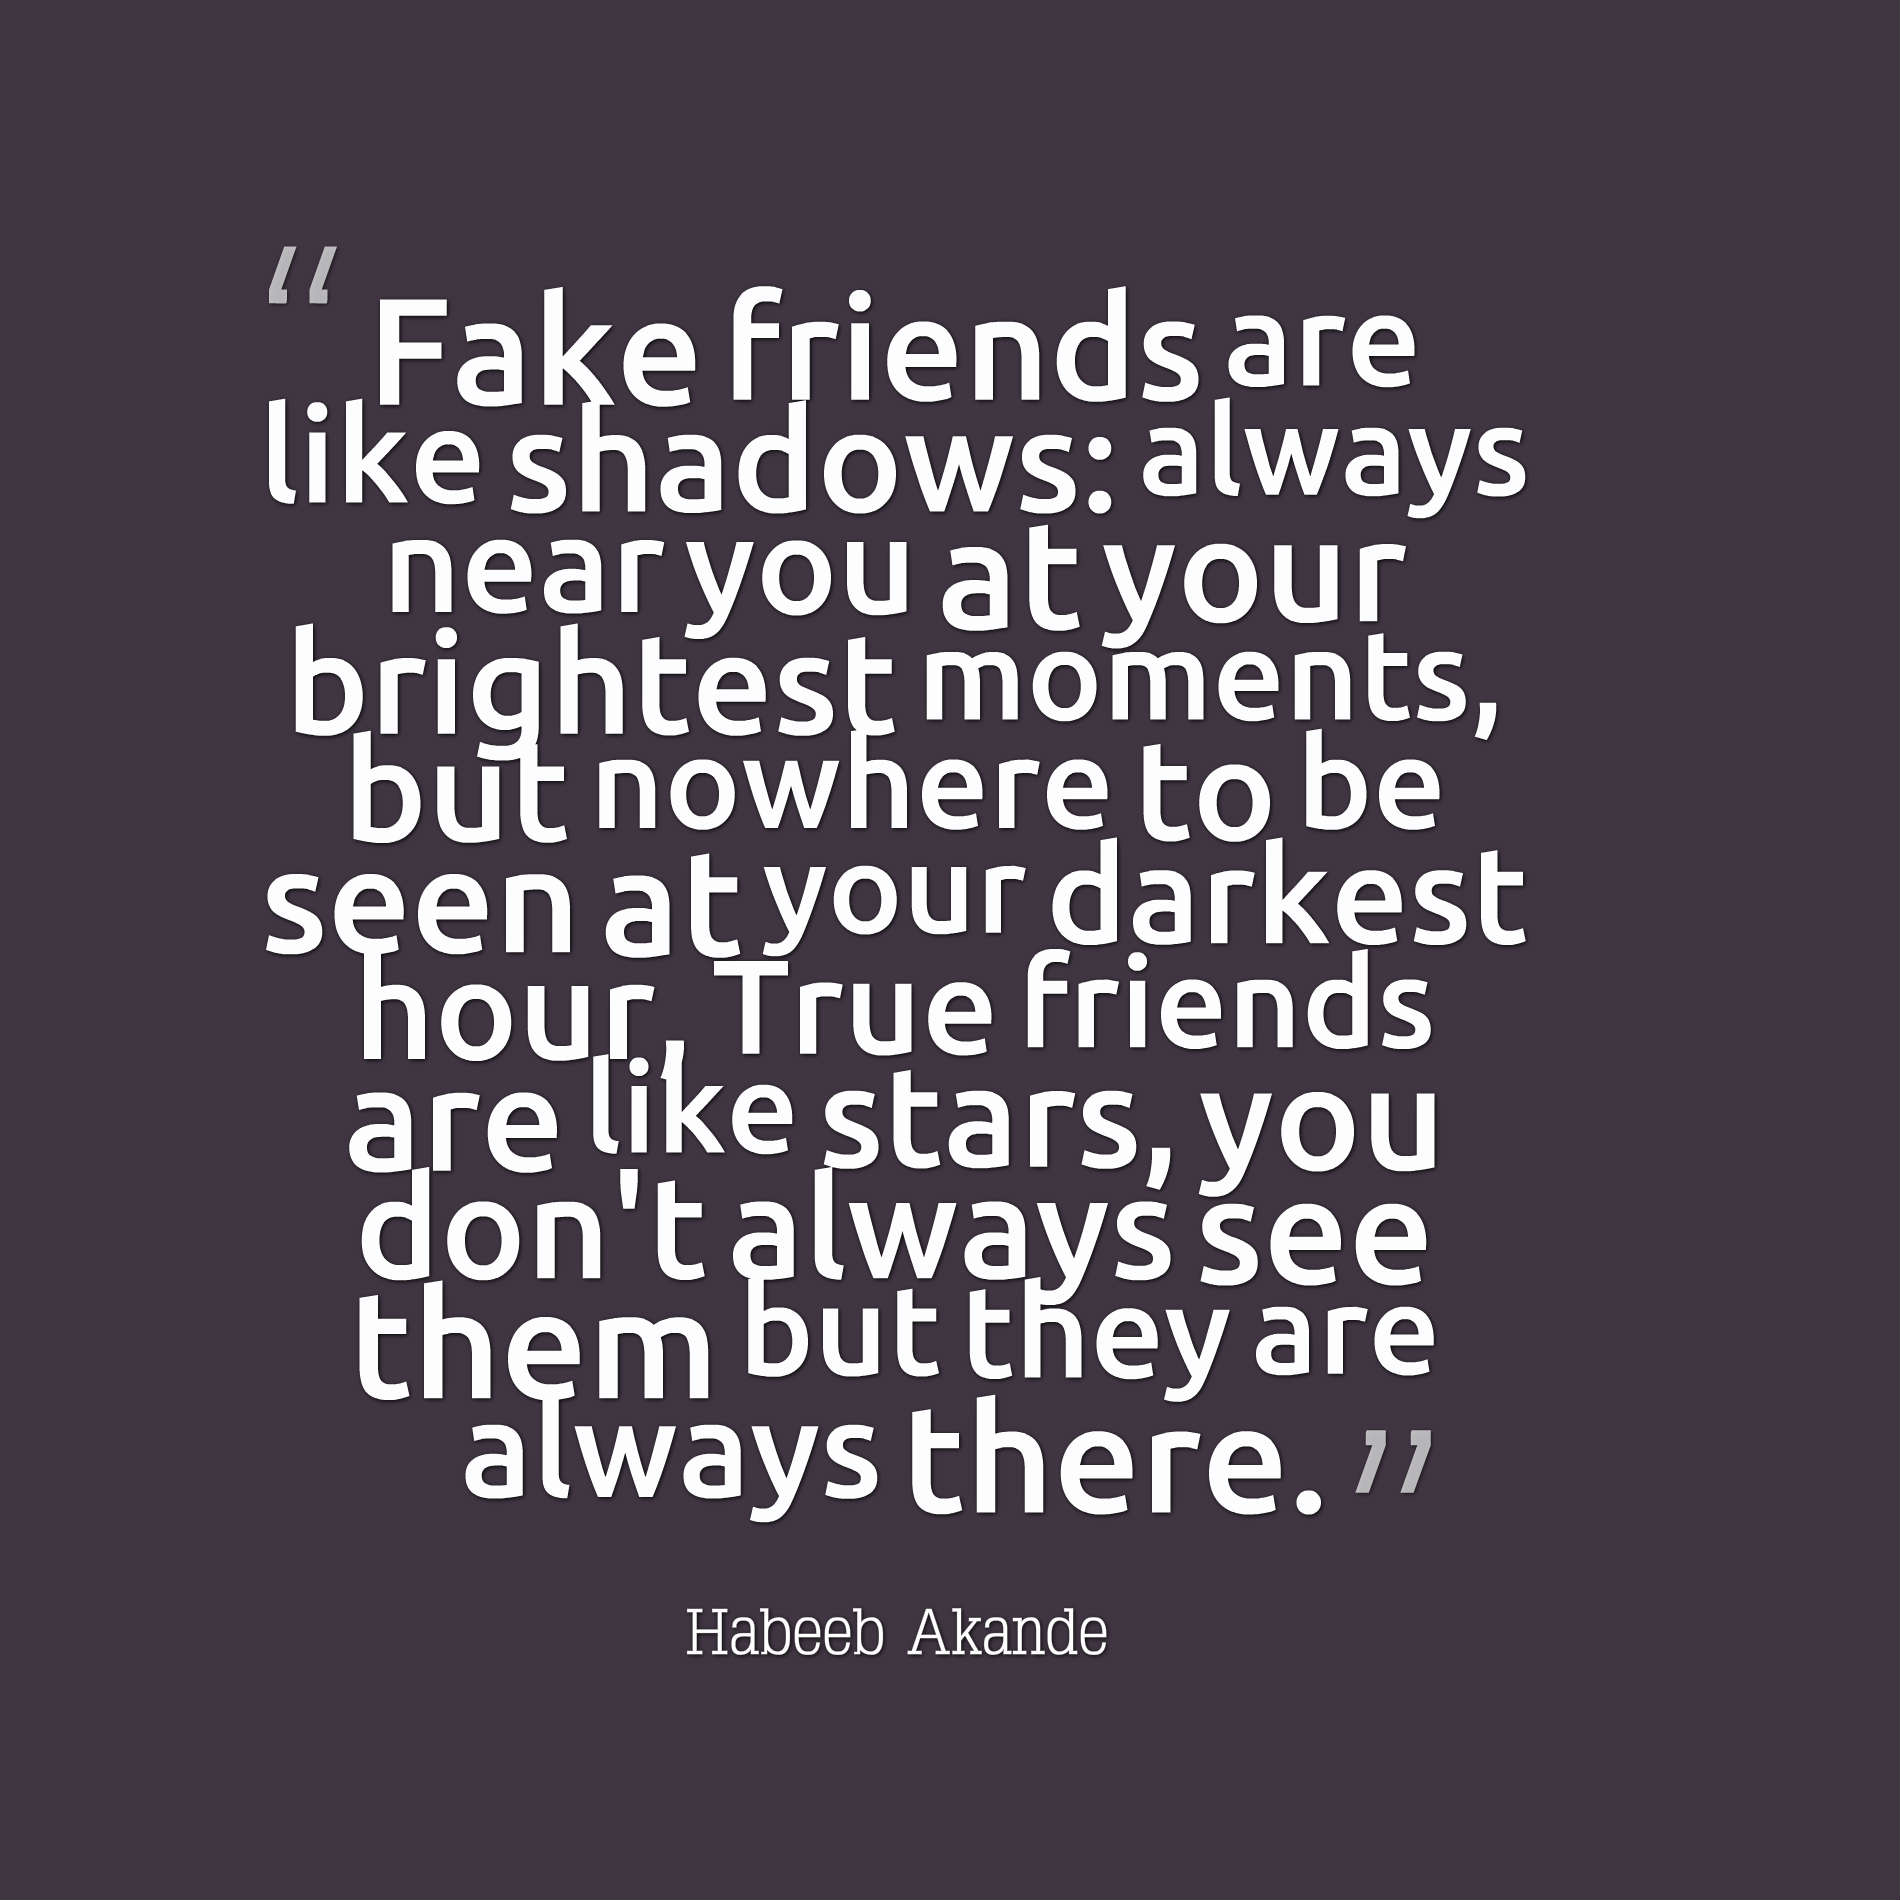 Fake friends are like shadows: always near you at your brightest moments, but nowhere to be seen at your darkest hour True friends are like stars, you don't always see them but they are always there.